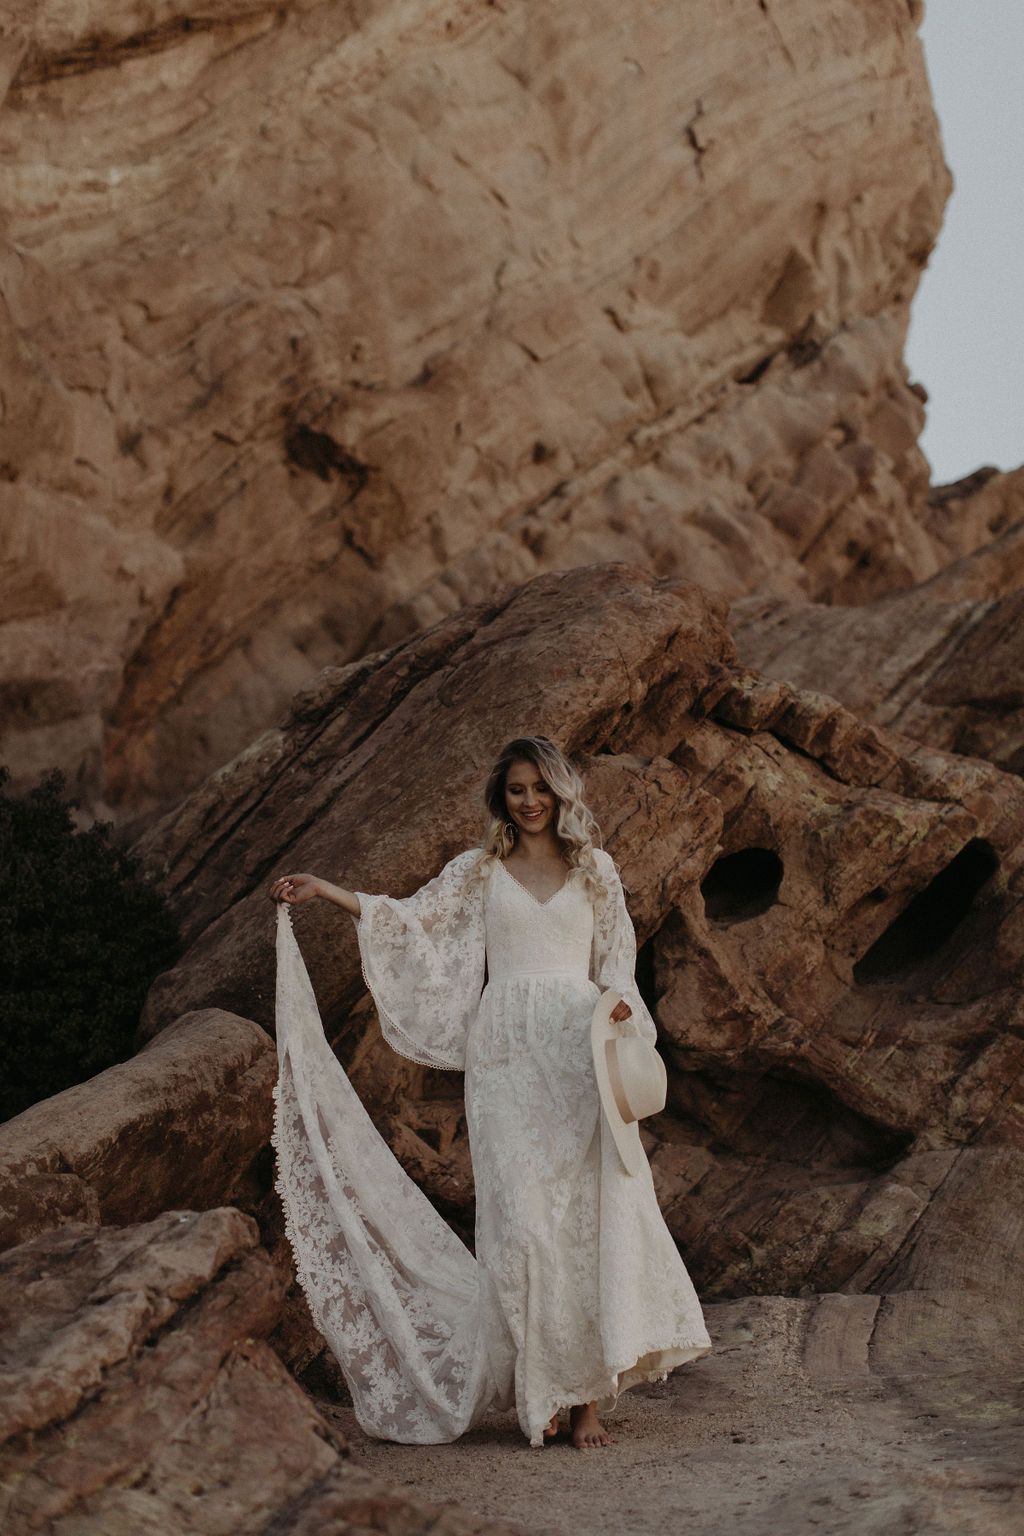 25 Chic Short Wedding Veils to Rock at the Altar